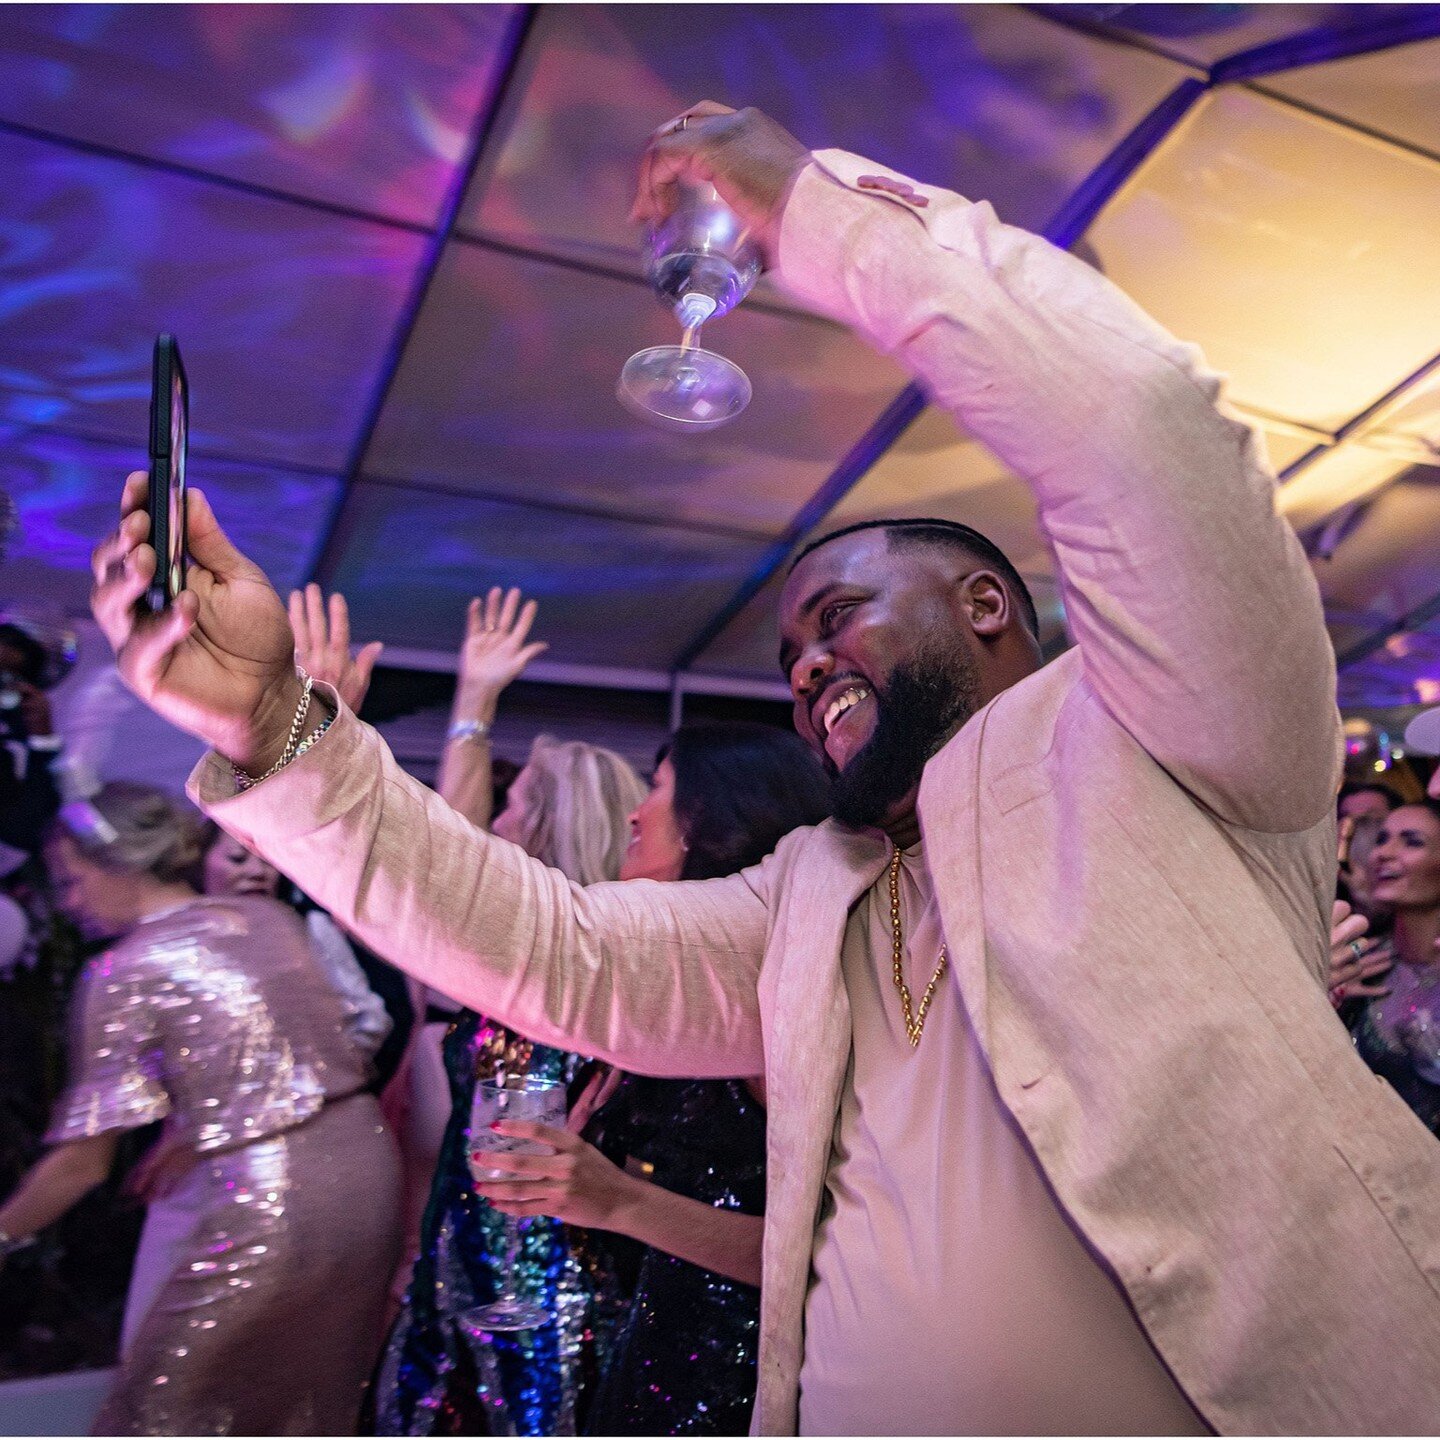 NYE is only a few days away &amp; we're reminiscing about last year's Dinner &amp; Gala at @thelorenhotels ~ which was all the rage! Where will YOU be spending New Year's Eve this year? 🥂
.
.
.
Photographer: @fianderfoto 
Photo Booth &amp; Live Boot